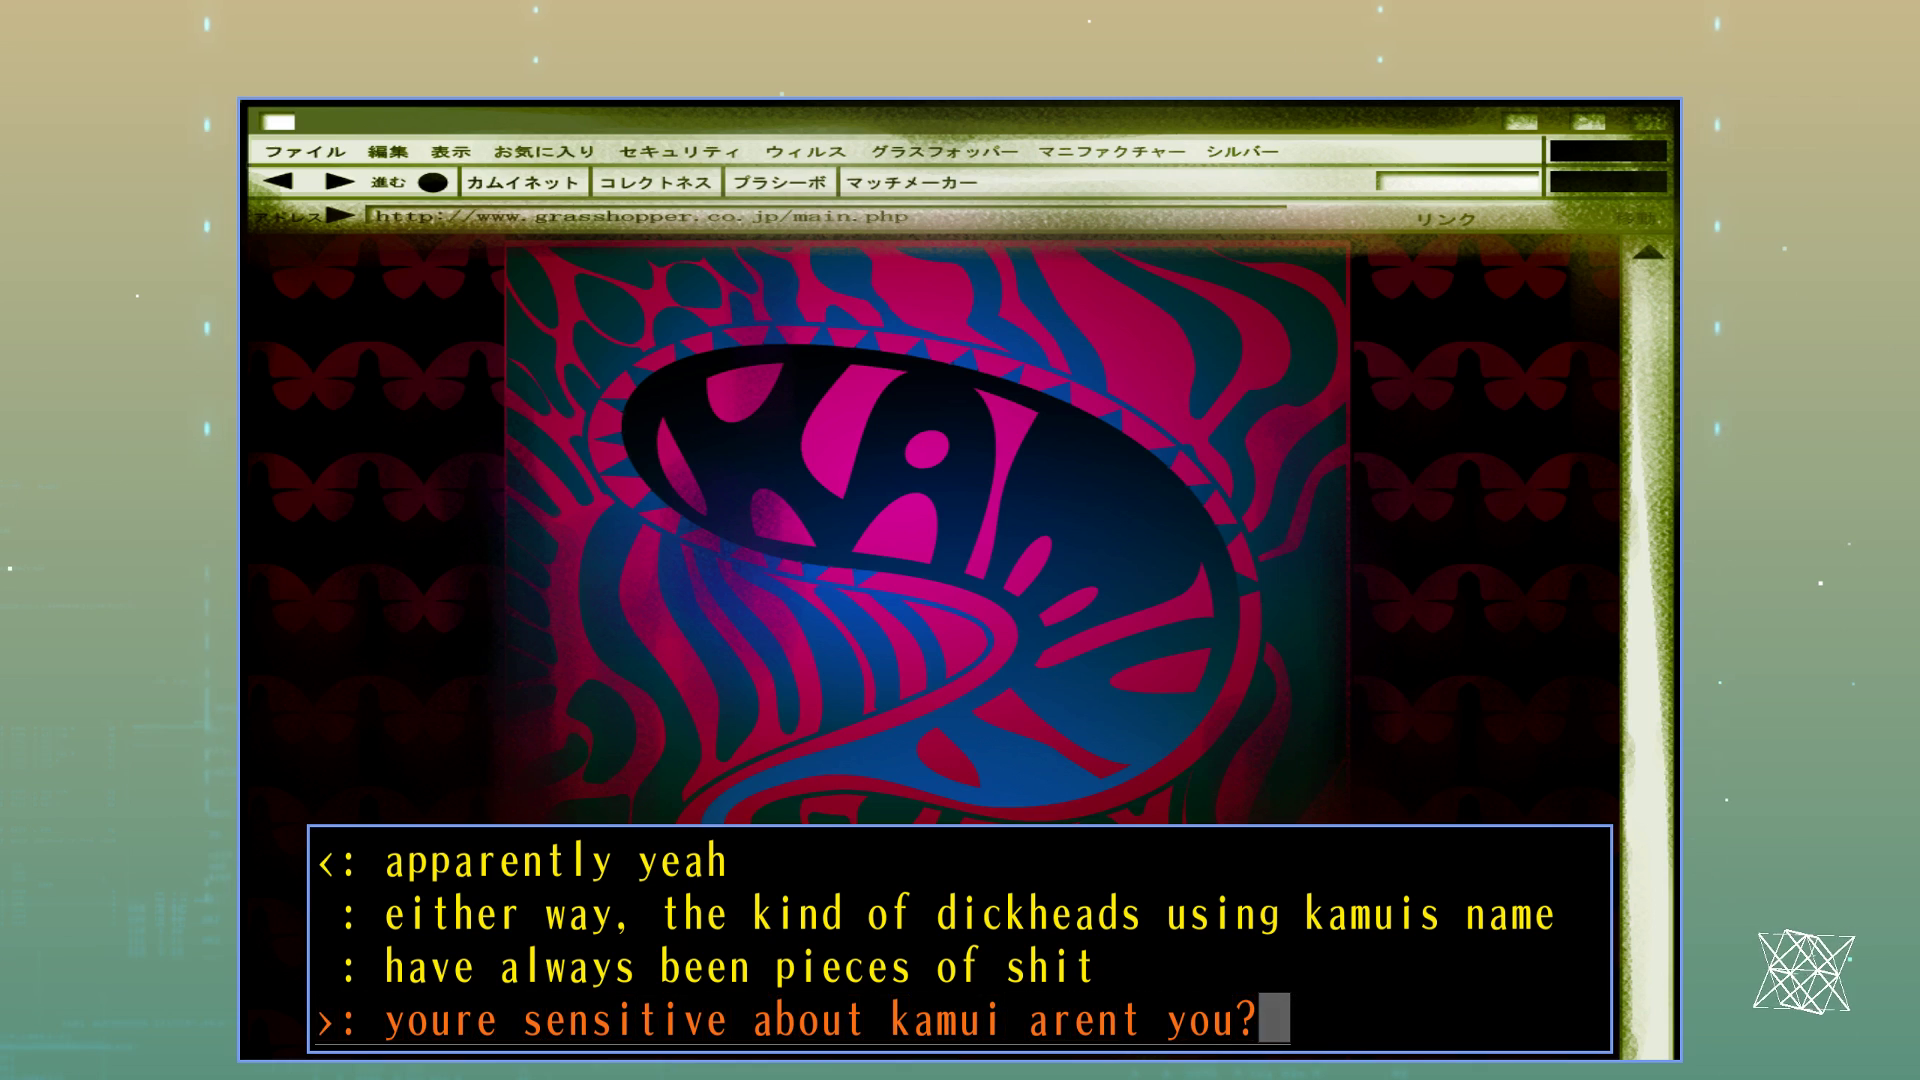 Screenshot from "TIGIRI." The Kamui Net homepage in a browser window with four tabs. The homepage shows the word "Kamui" in Latin letters as part of a psychedelic design. In the chat window, Tokio has written the following:

"apparently, yeah
either way, the kind of dickheads using kamuis name have always been pieces of shit"

To which Slash responds, "youre sensitive about kamui arent you?"